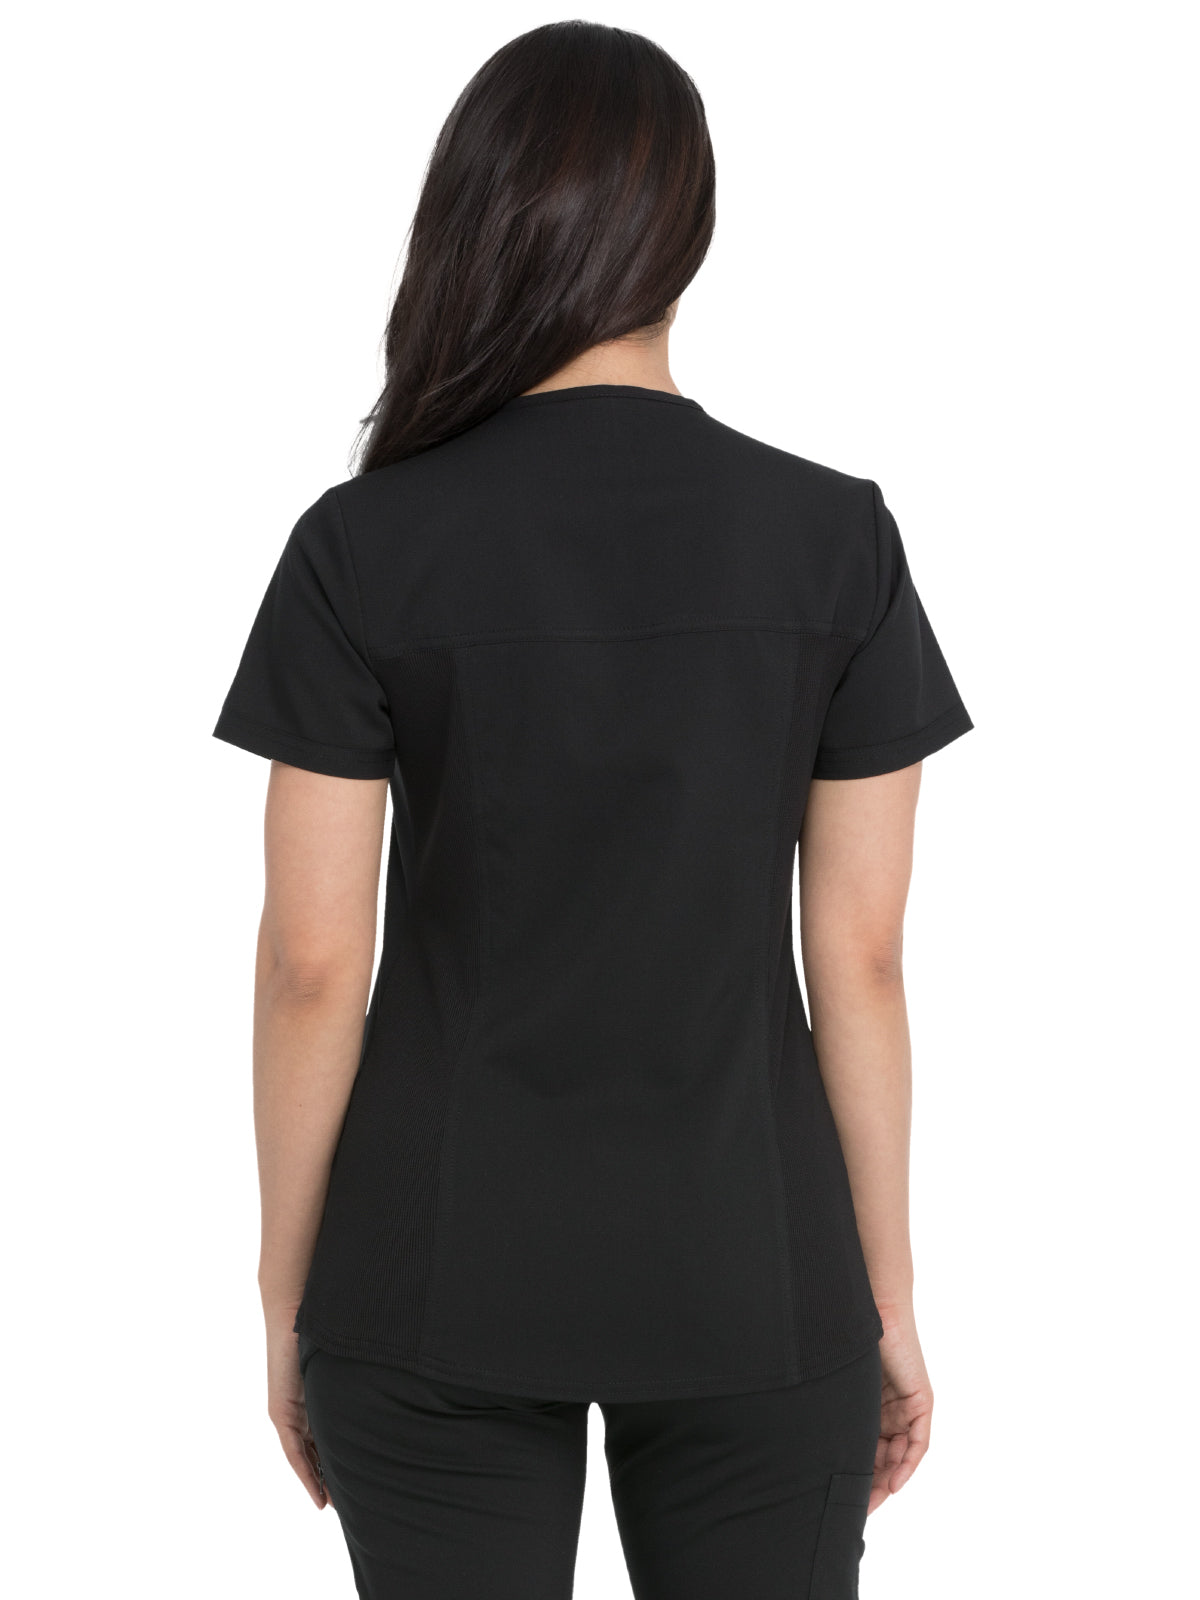 Women's V-Neck Top With Rib Knit Panels